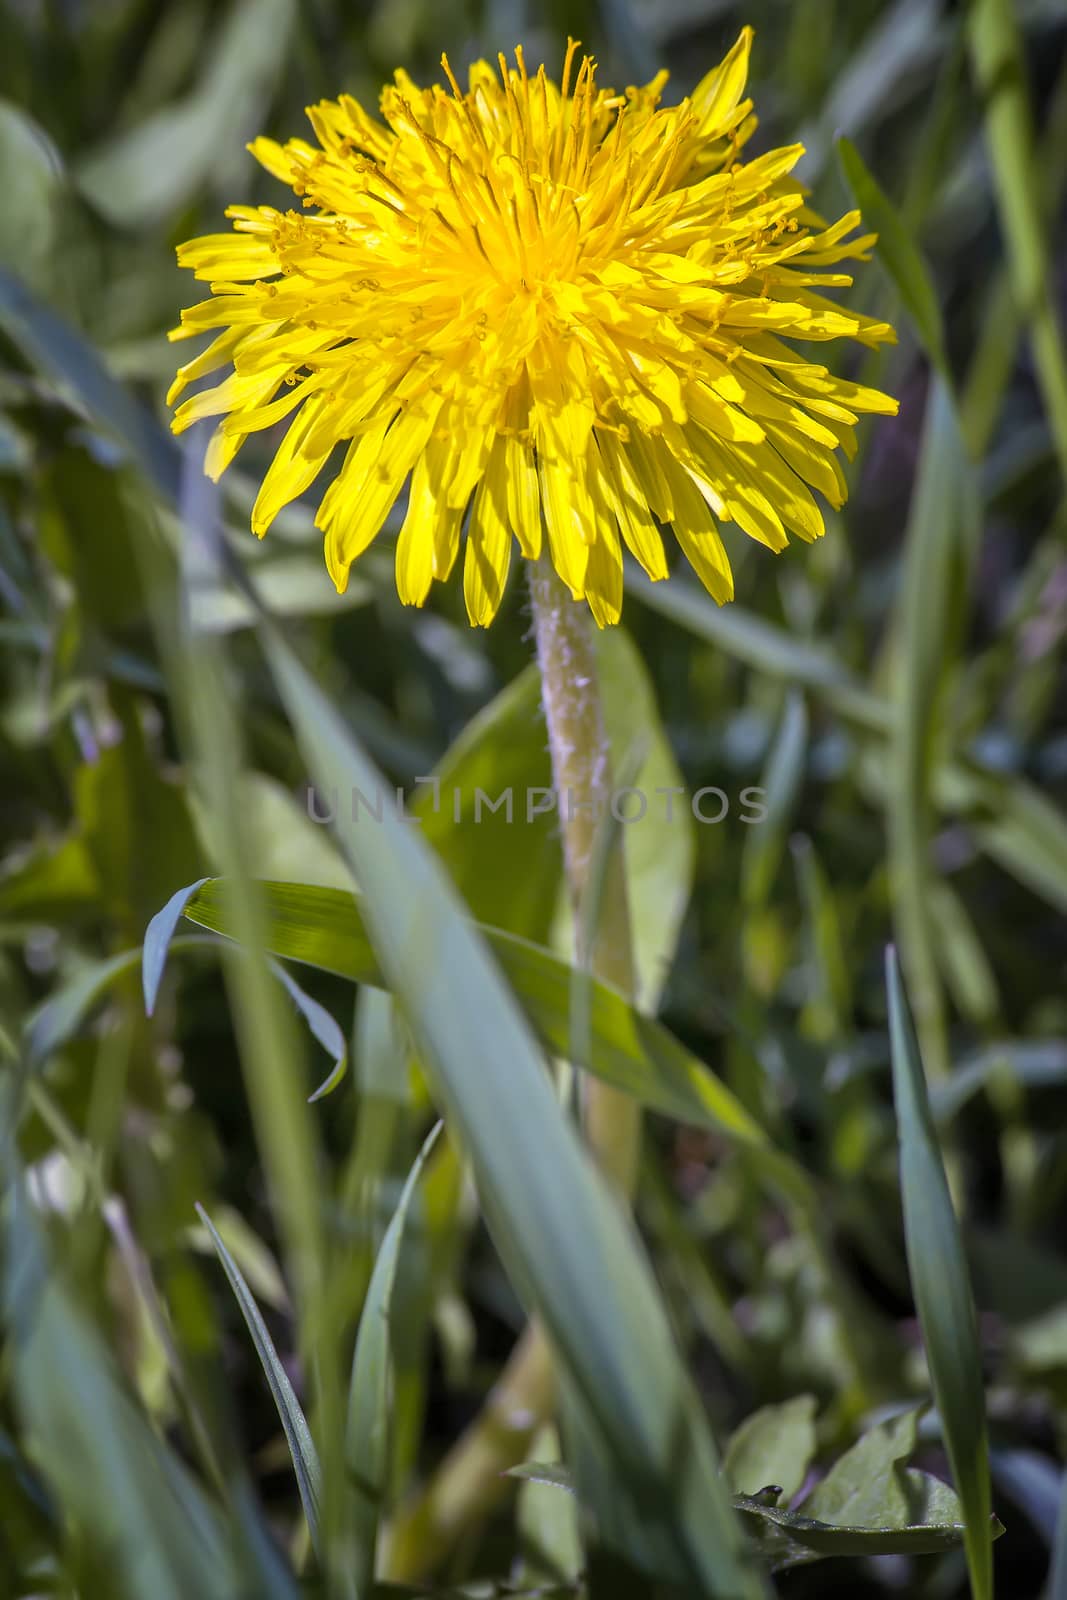 Blooming dandelions in the grass. by georgina198